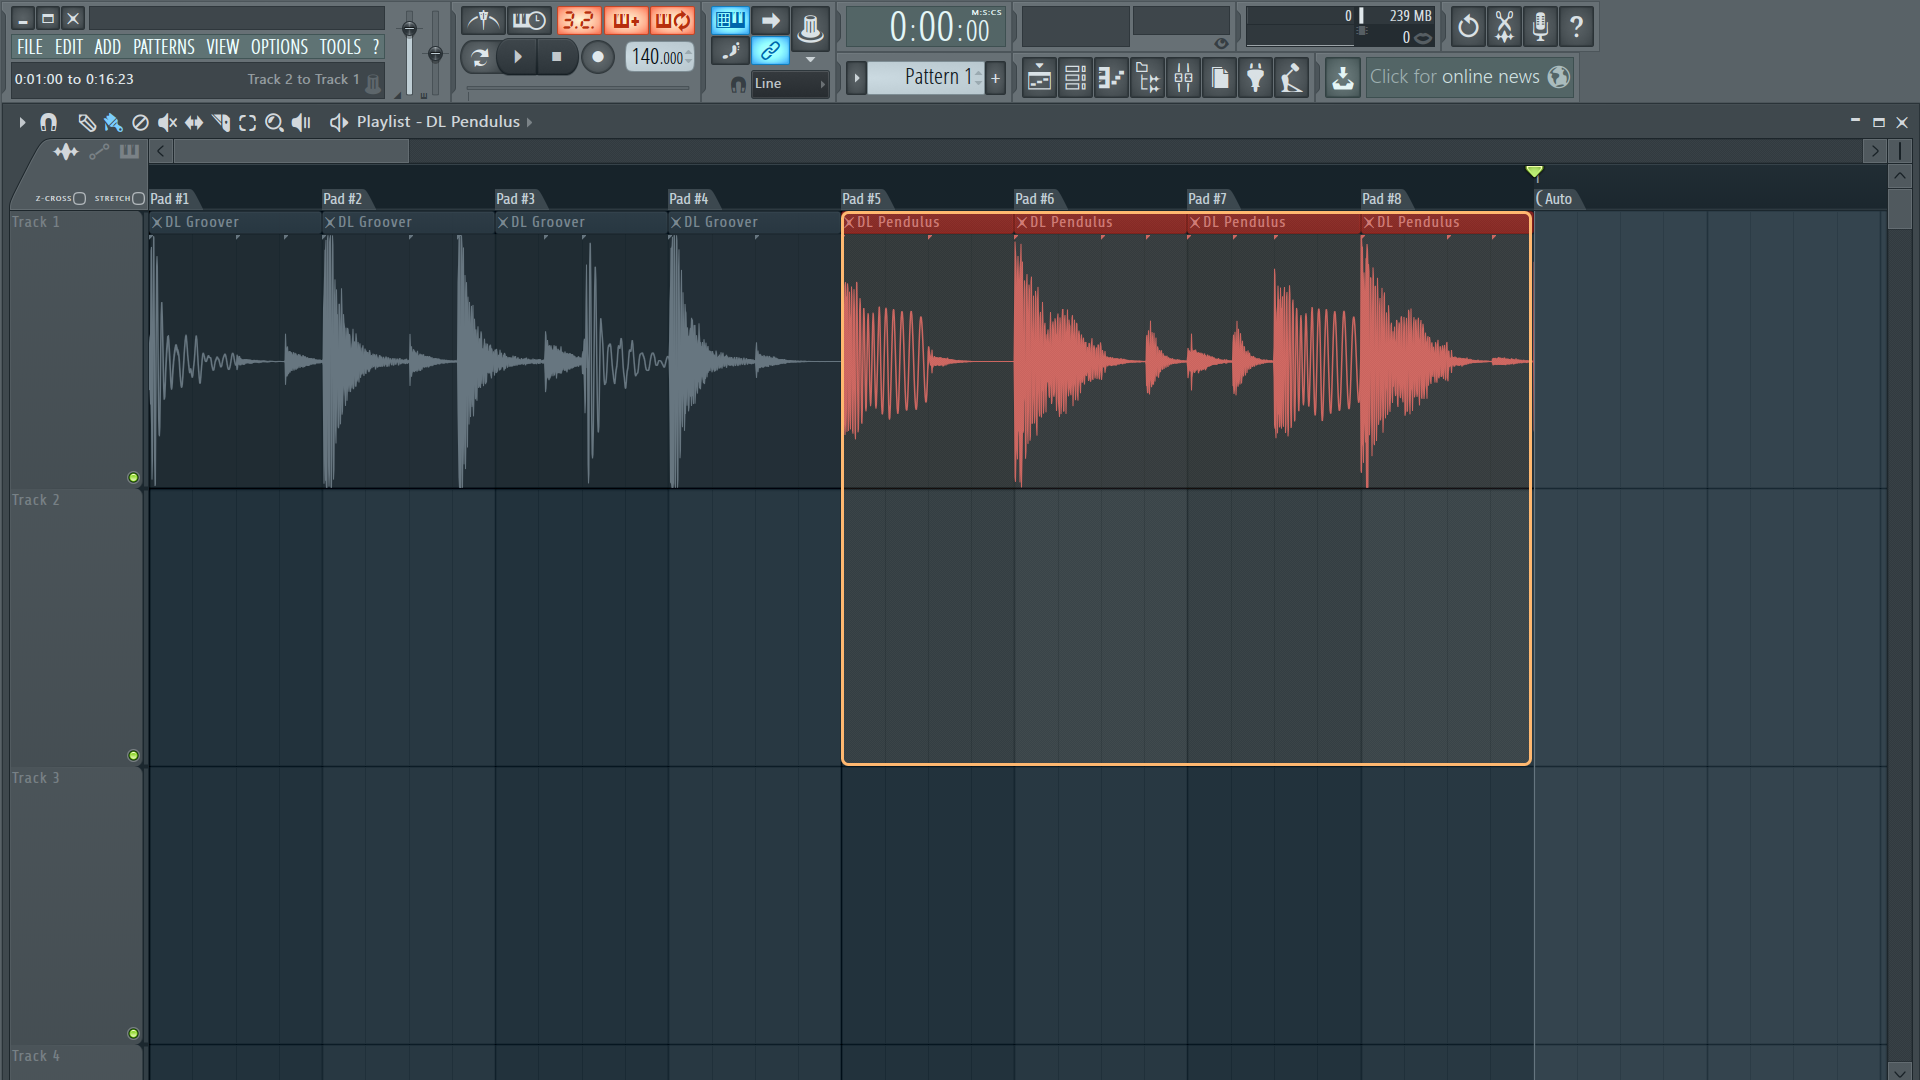 FL Studio Tutorial: Beat Juggling with Performance Mode - Step-by-Step |  MusicTech